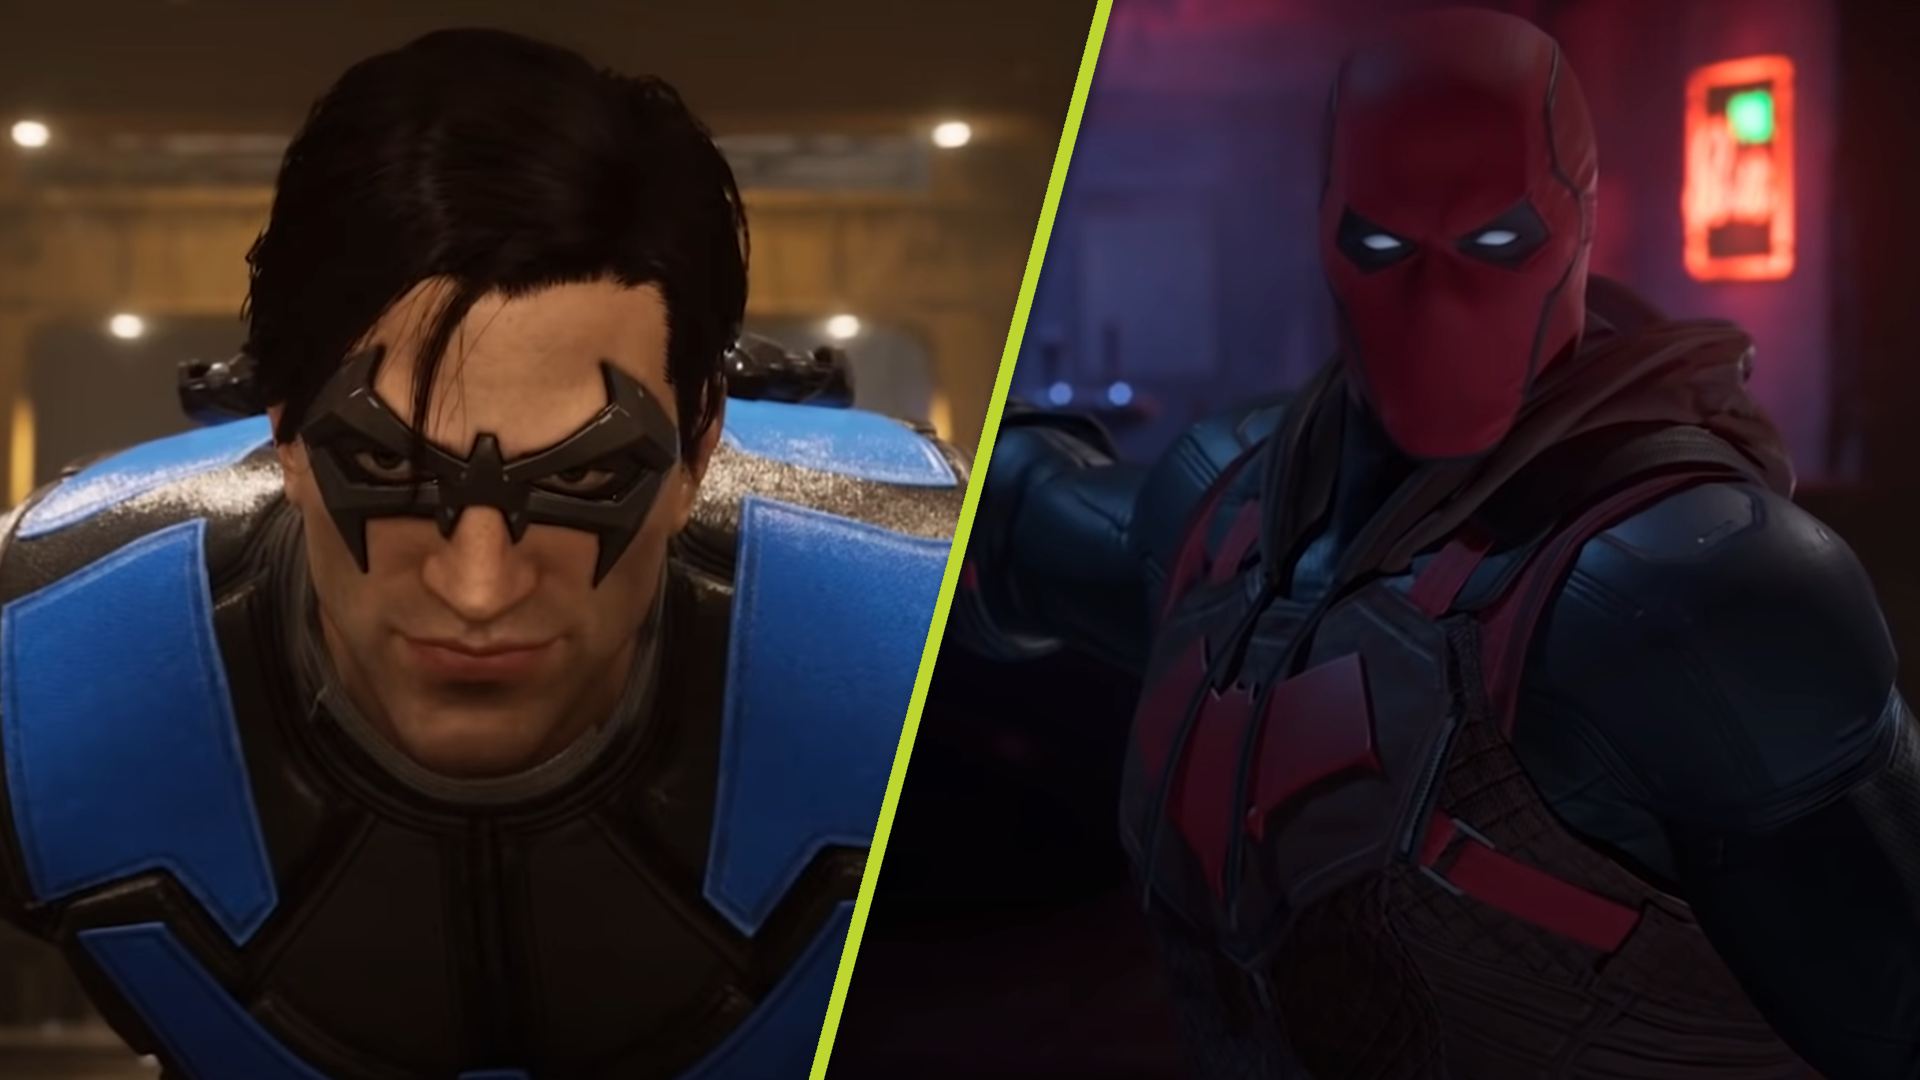 GOTHAM KNIGHTS gameplay demo shows off Nightwing and Red Hood combat